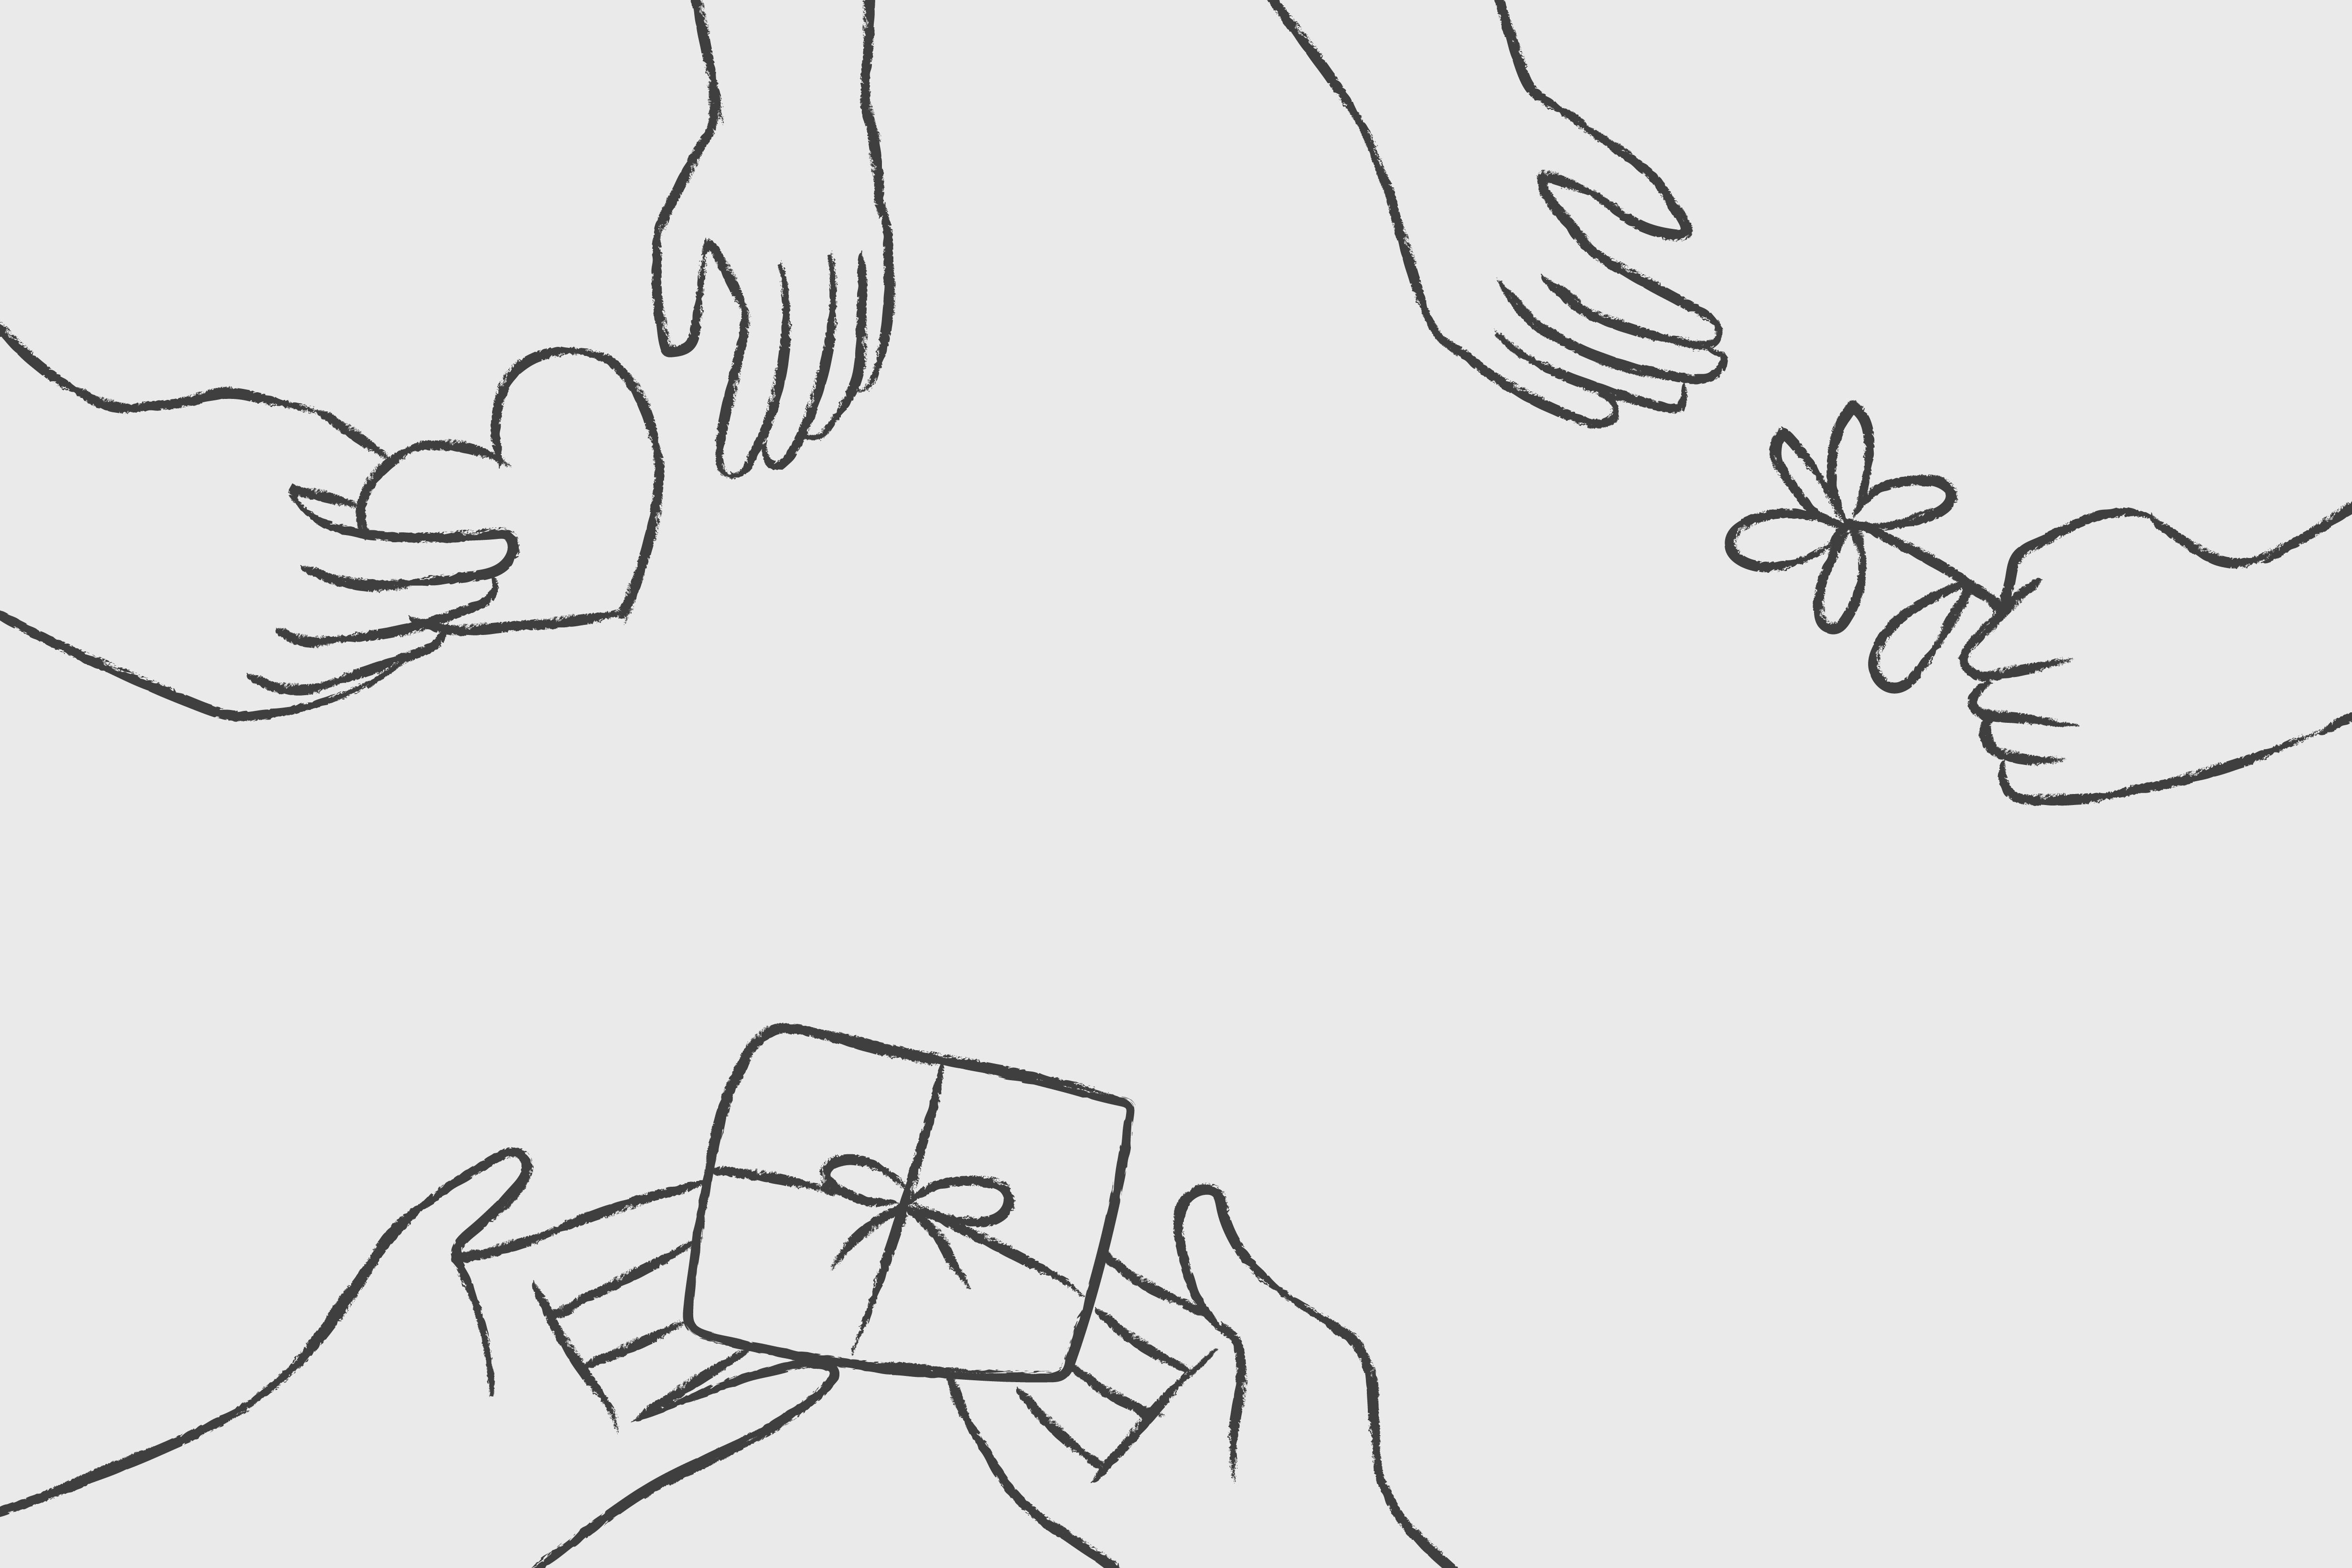 A doodle of hands giving gifts to one another.